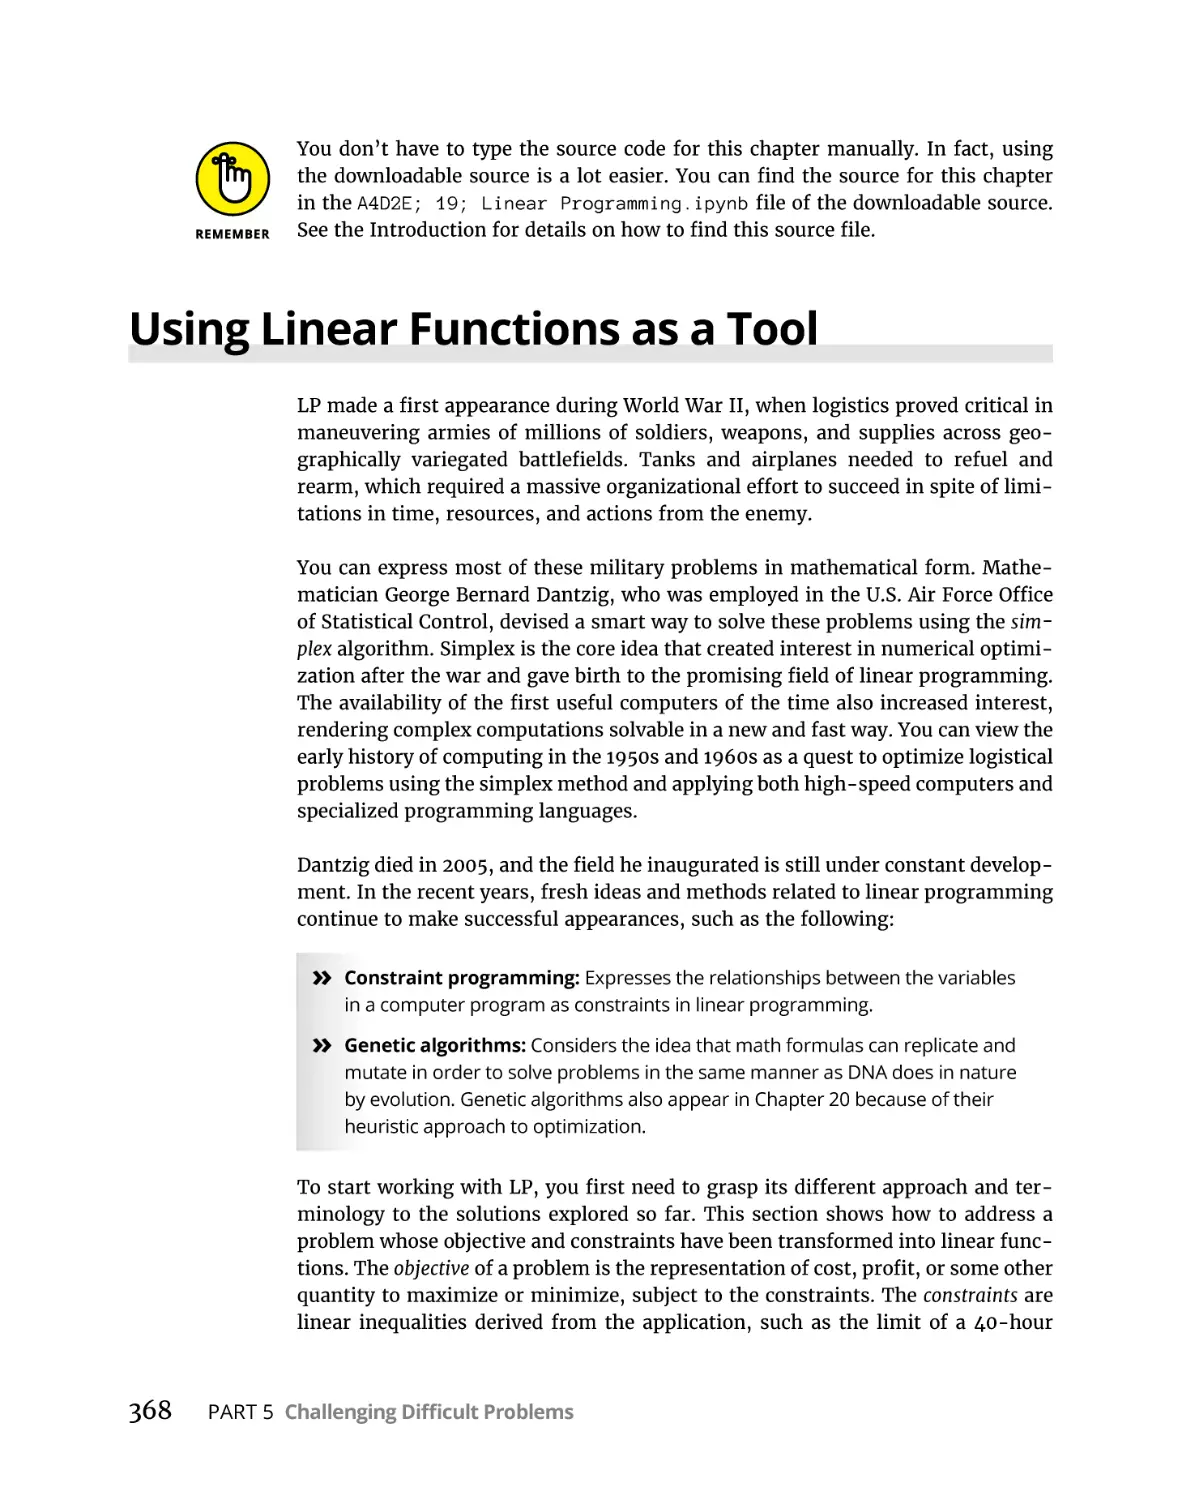 Using Linear Functions as a Tool